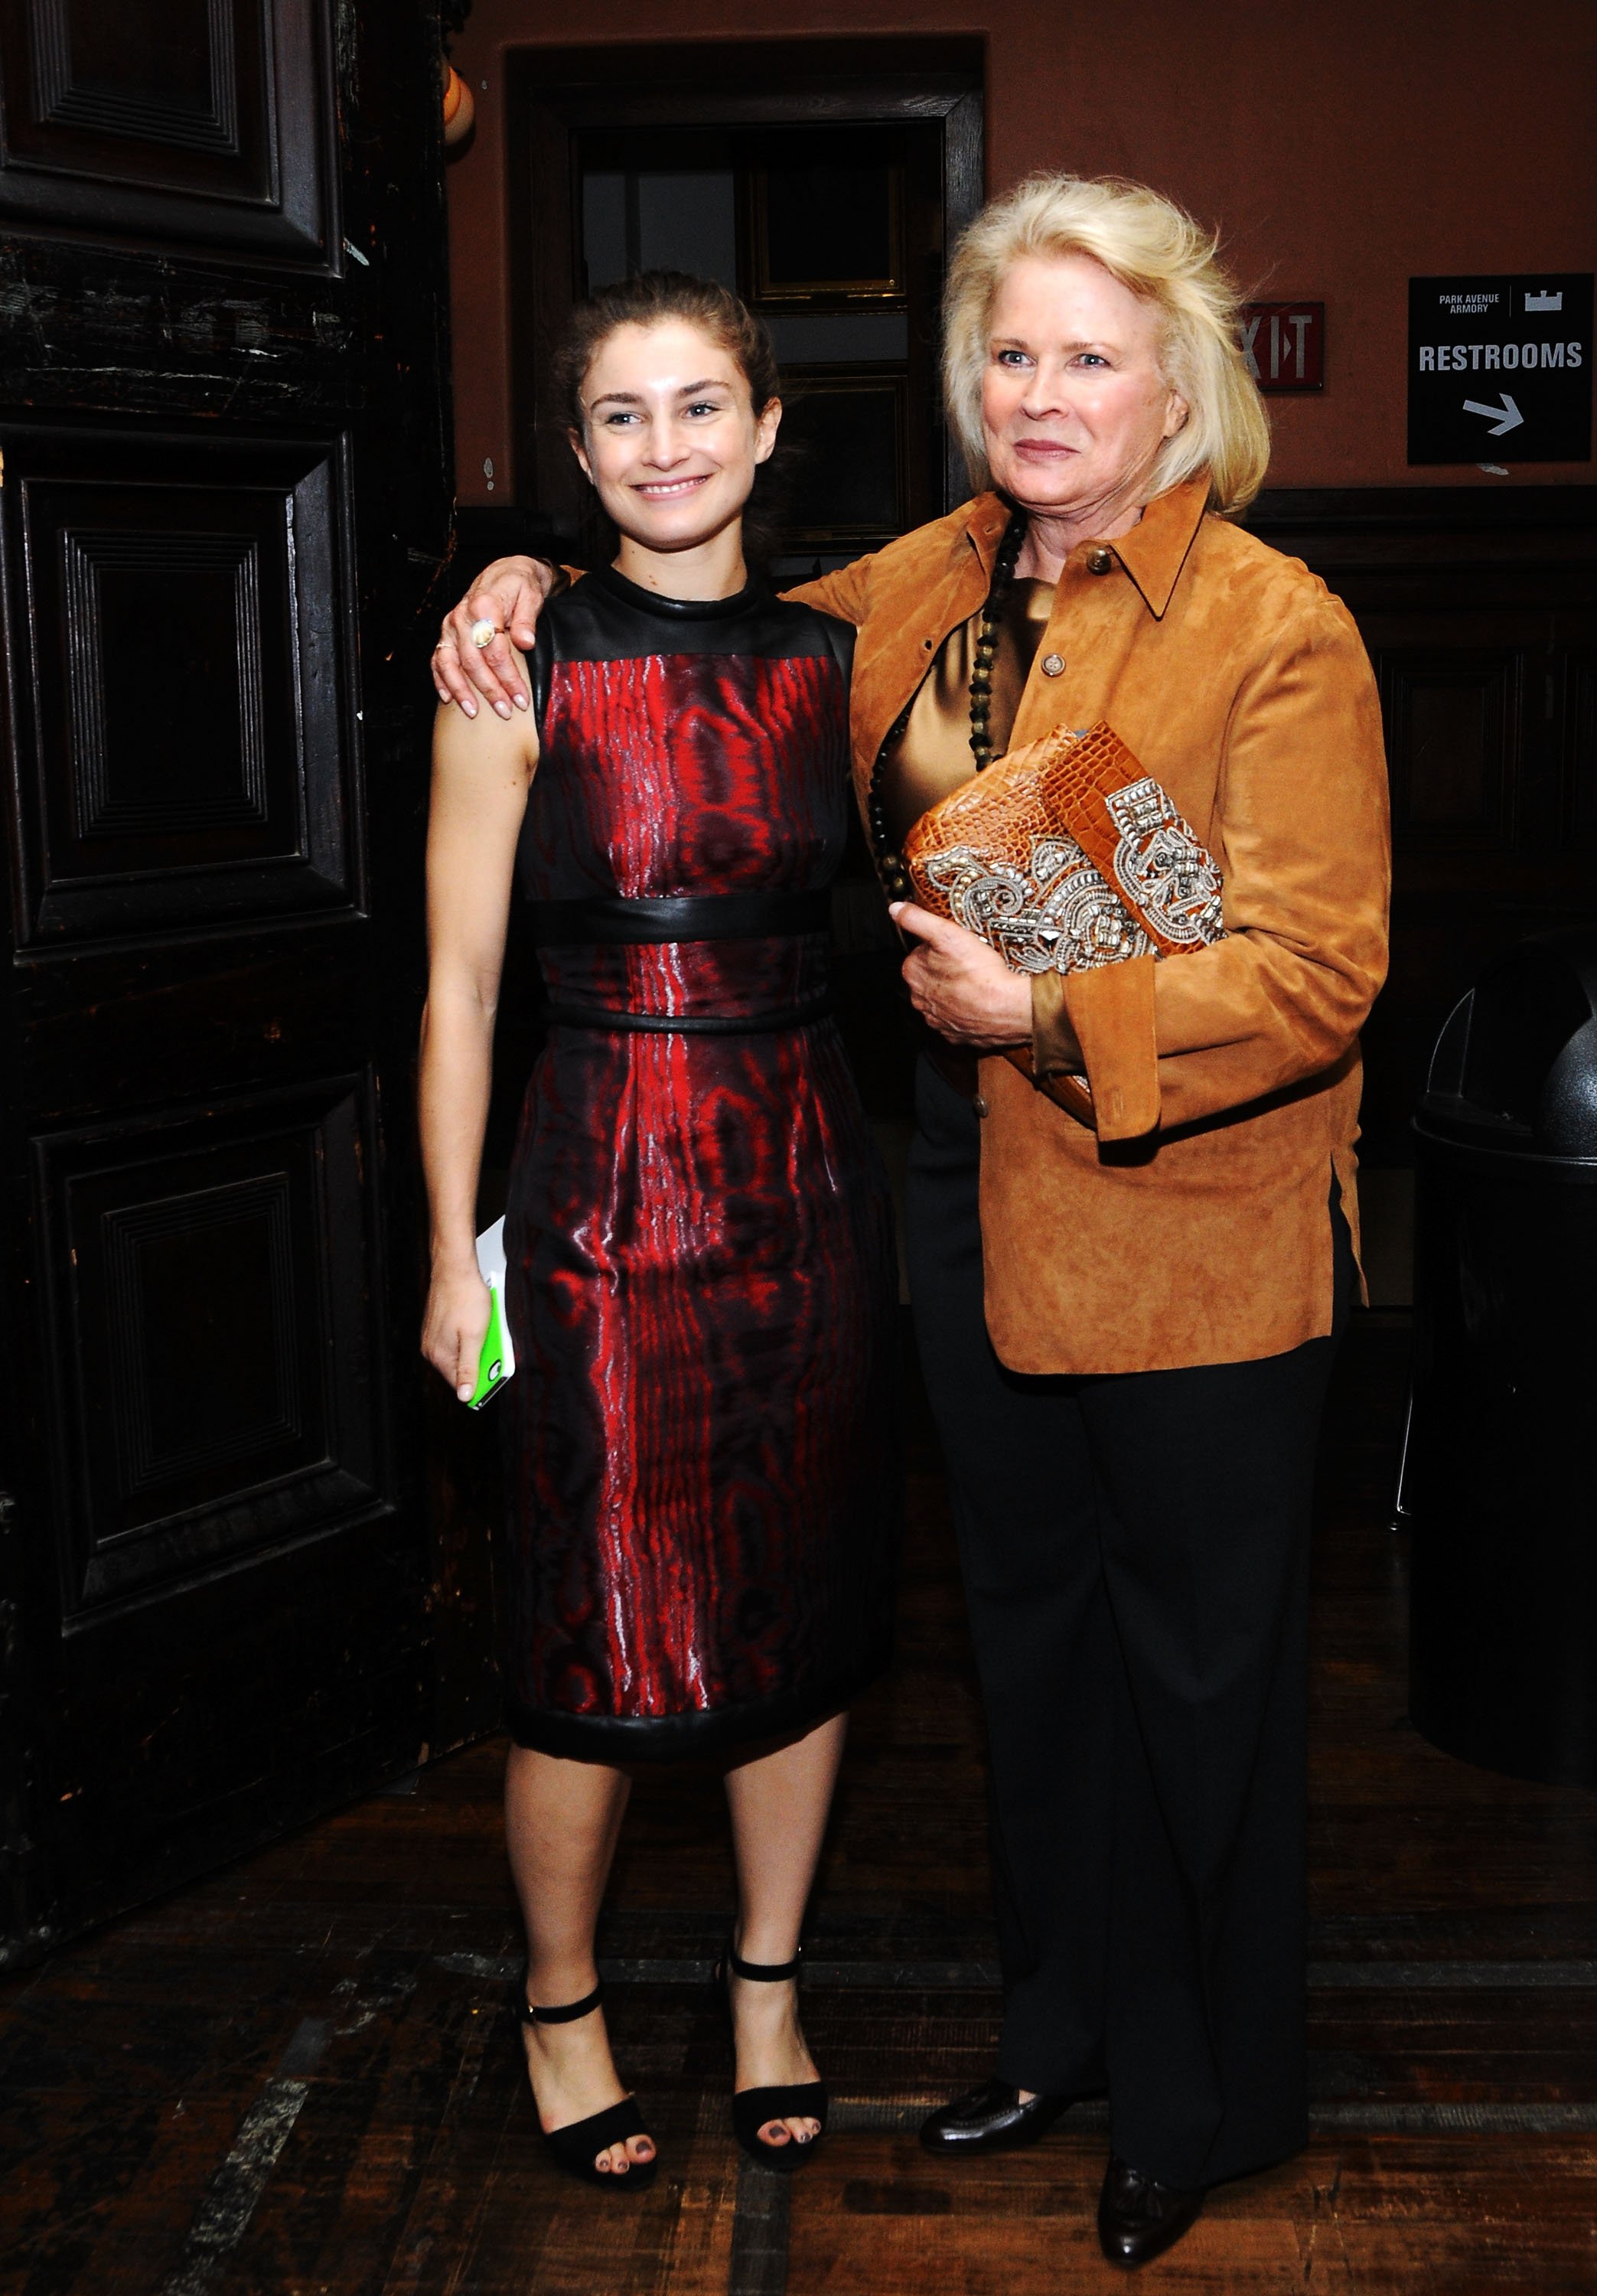 Candice Bergen and her daughter Chloe Malle attend The Society of Memorial Sloan-Kettering Cancer Center's 24th annual Preview Party for The International Fine Art and Dealers Show at Park Avenue Armory on October 18, 2012 in New York City | Source: Getty Images